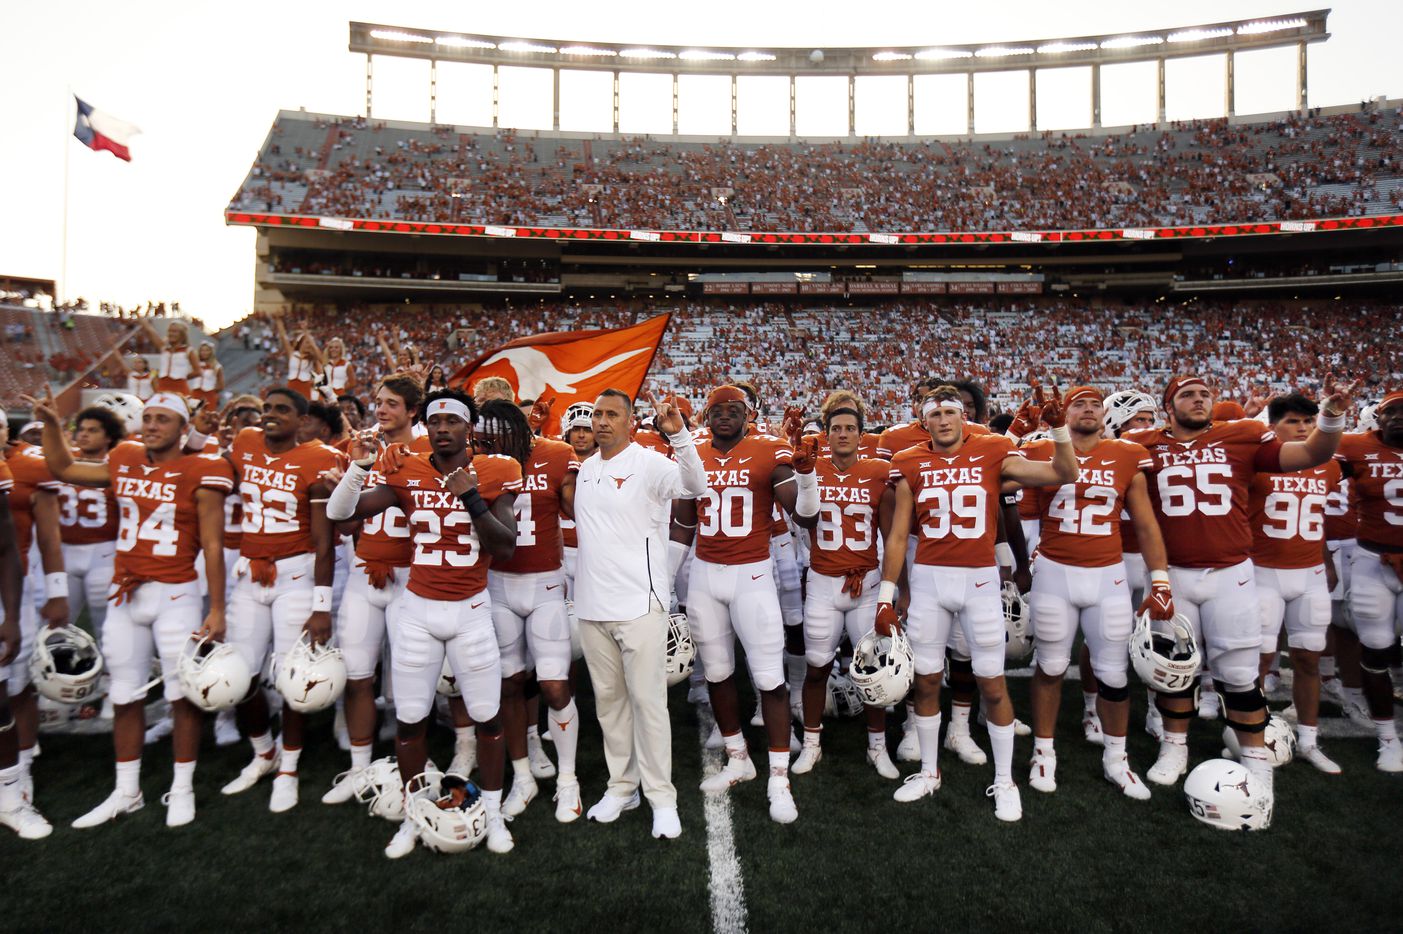 Texas Longhorns head coach Steve Sarkisian (center) and his players sing 'The Eyes of Texas' following their win over the Louisiana-Lafayette Ragin Cajuns at DKR-Texas Memorial Stadium in Austin, Saturday, September 4, 2021. (Tom Fox/The Dallas Morning News)